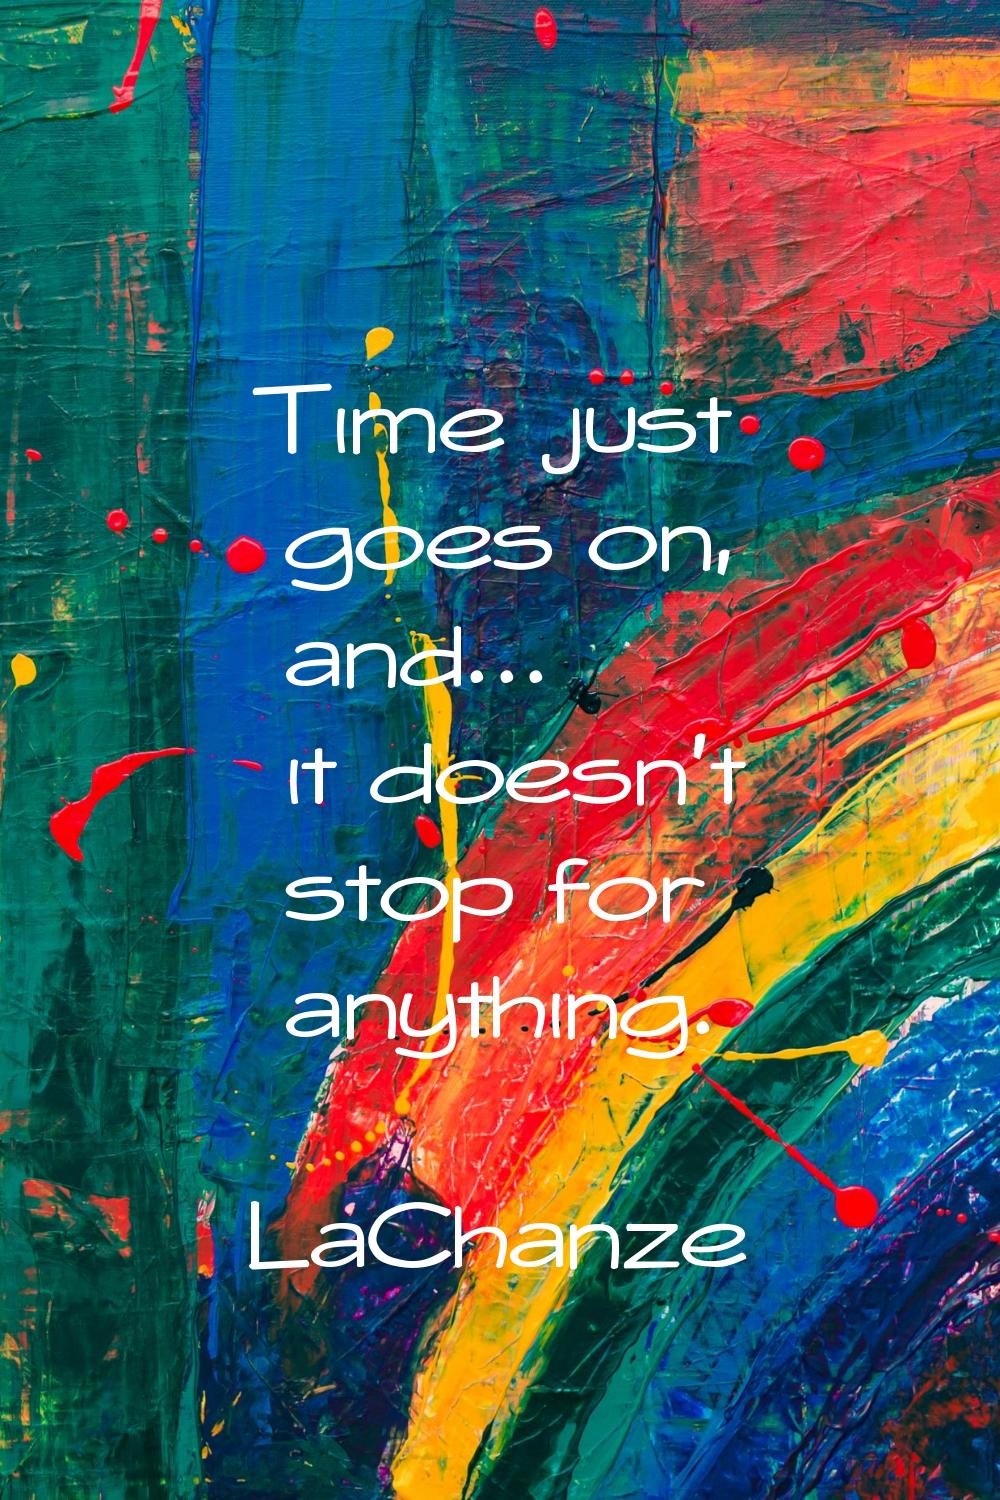 Time just goes on, and... it doesn't stop for anything.